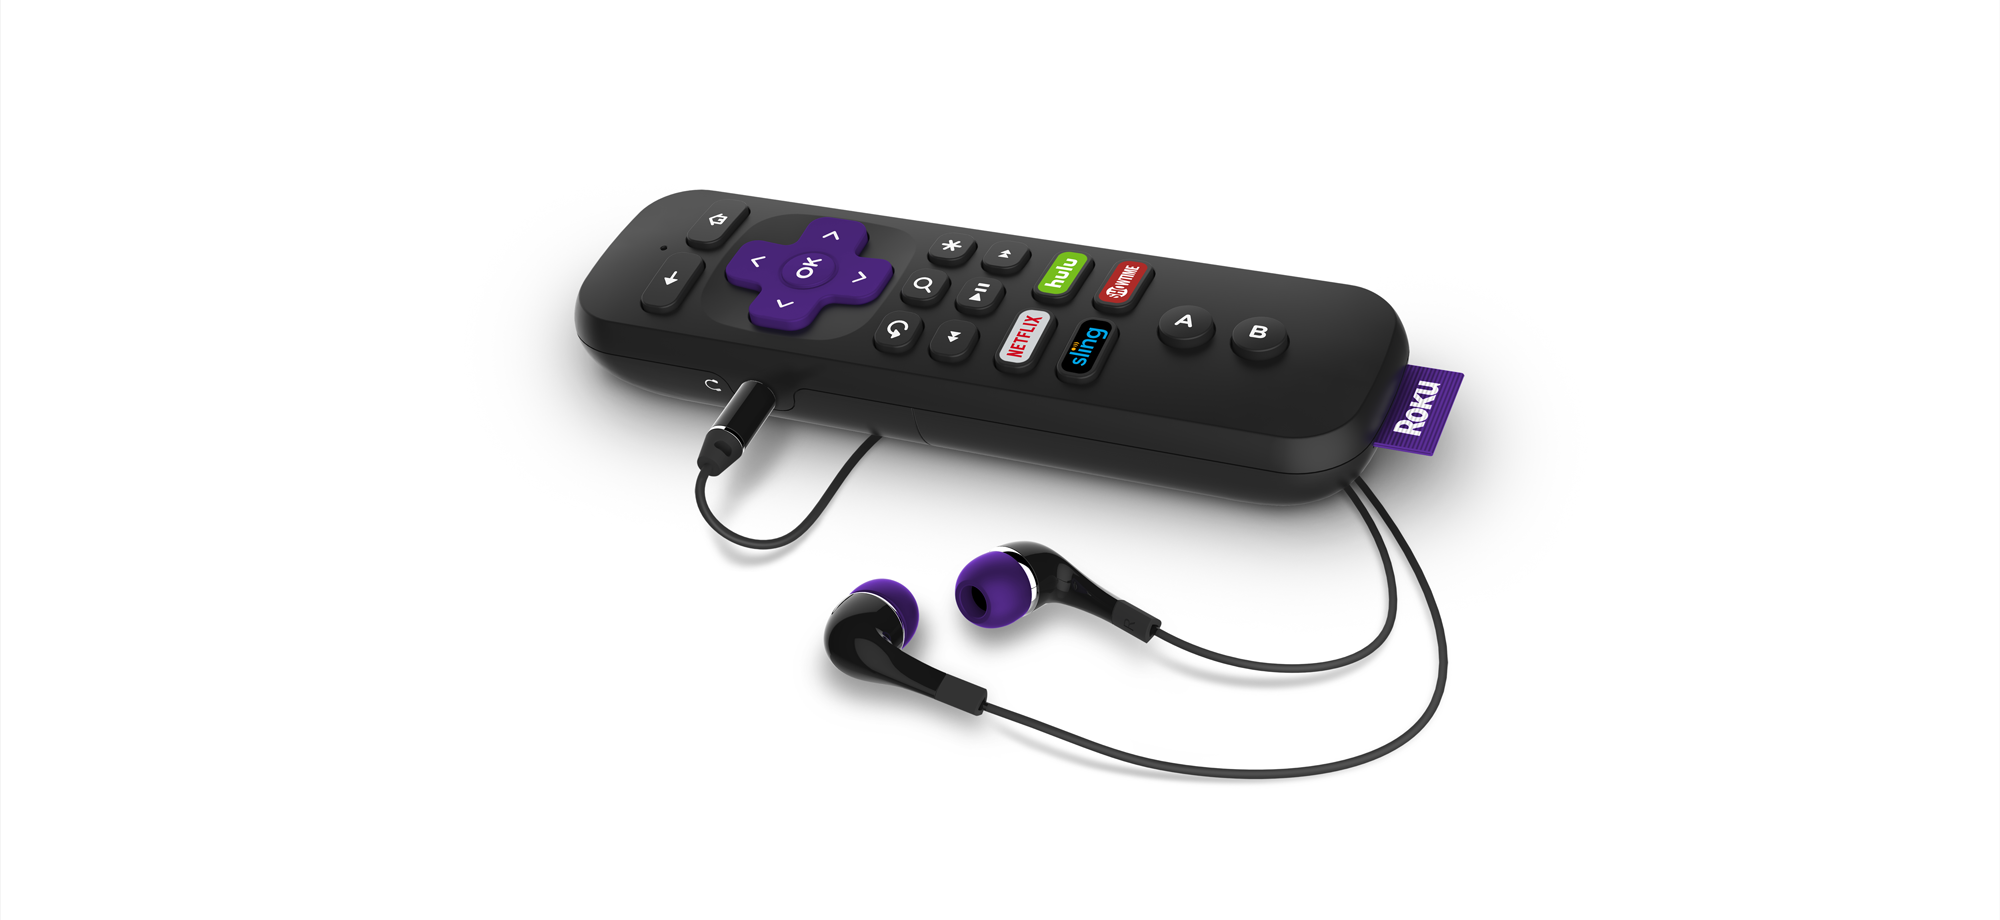 COOPER_GARY-4_REMOTE-WITH-HEADPHONES_001.png